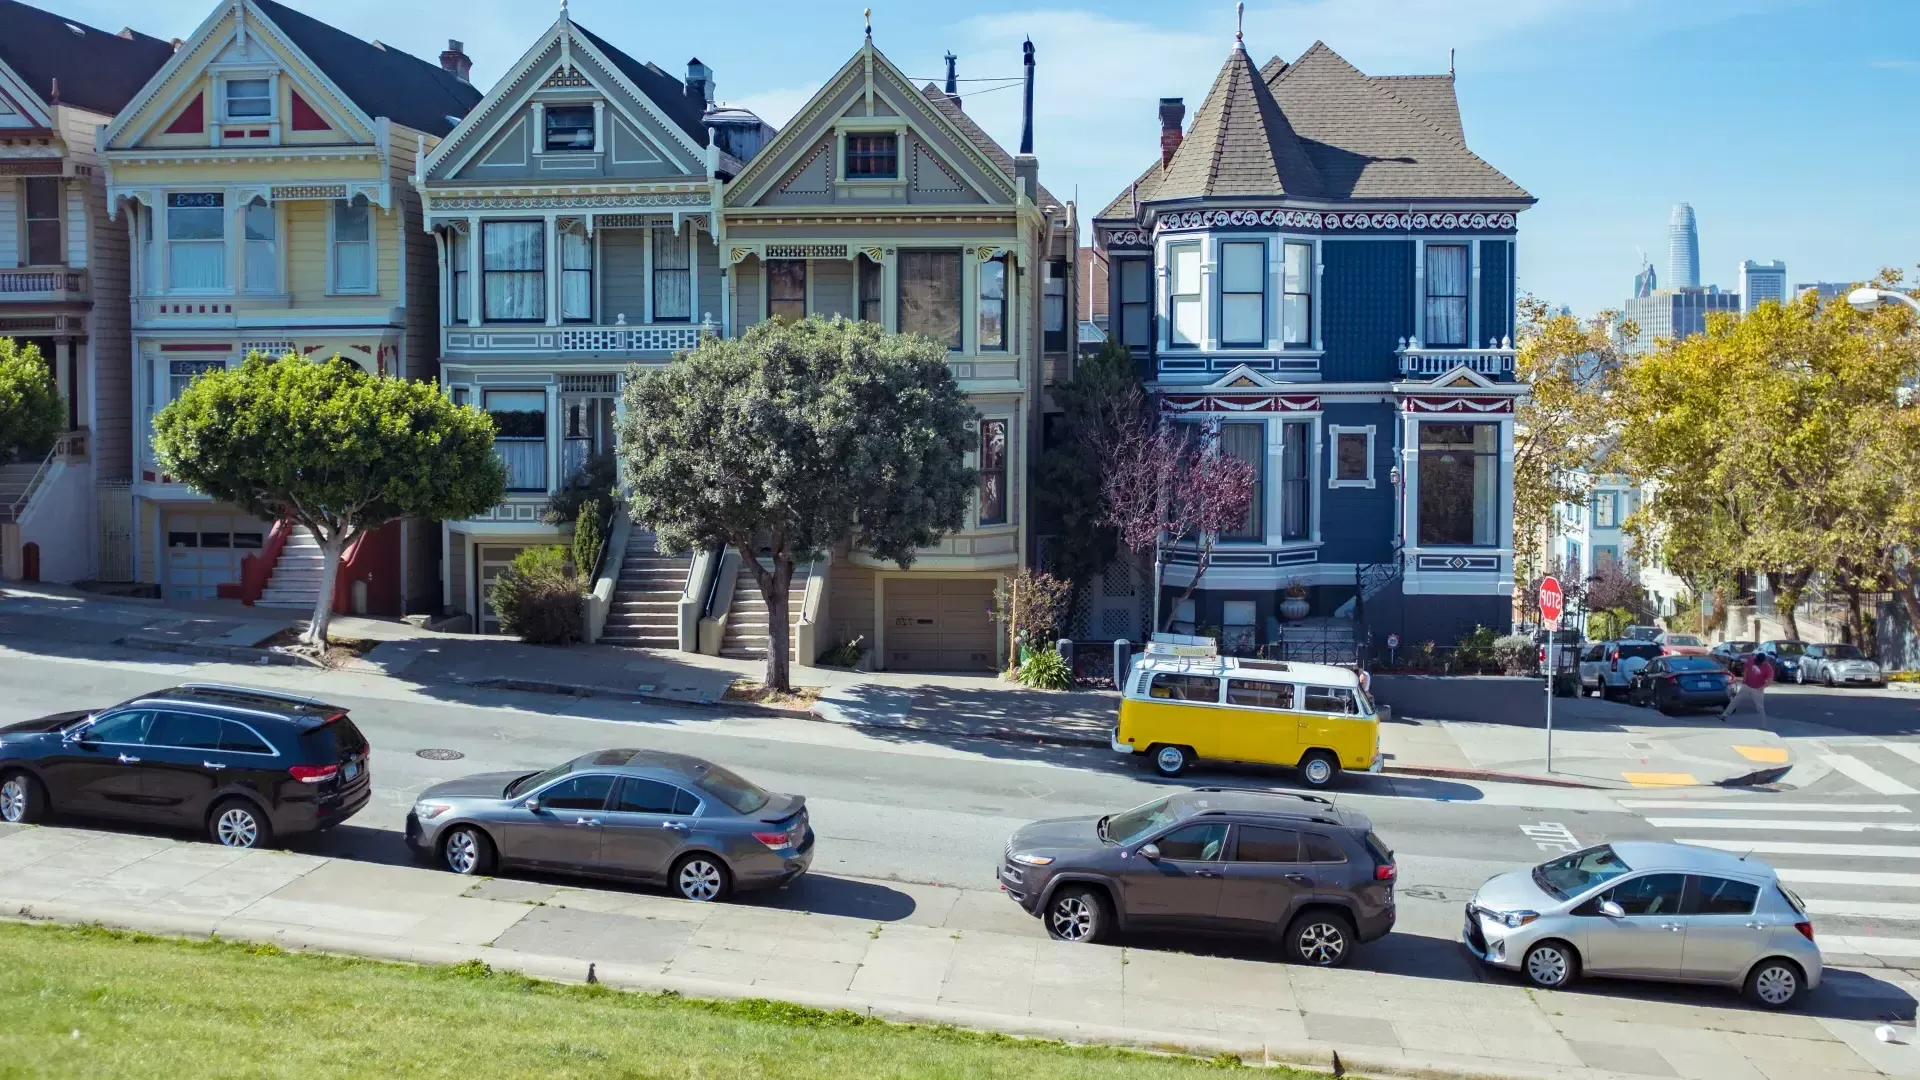 Cars parked in front of the Painted Ladies